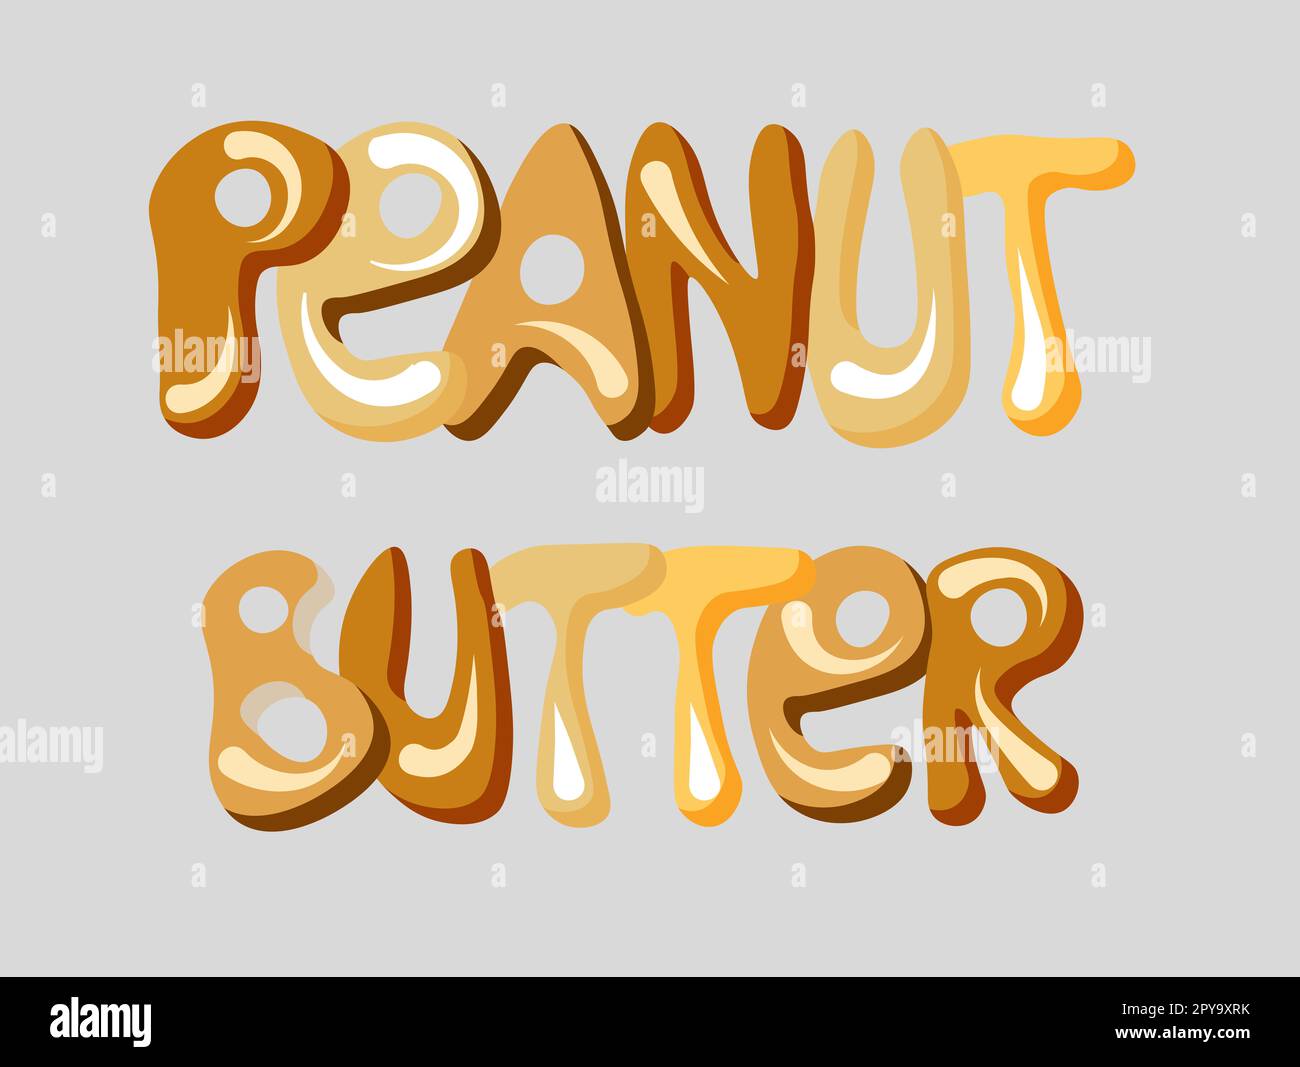 peanut butter. quote peanut butter.vector illustration isolated. Stock Photo